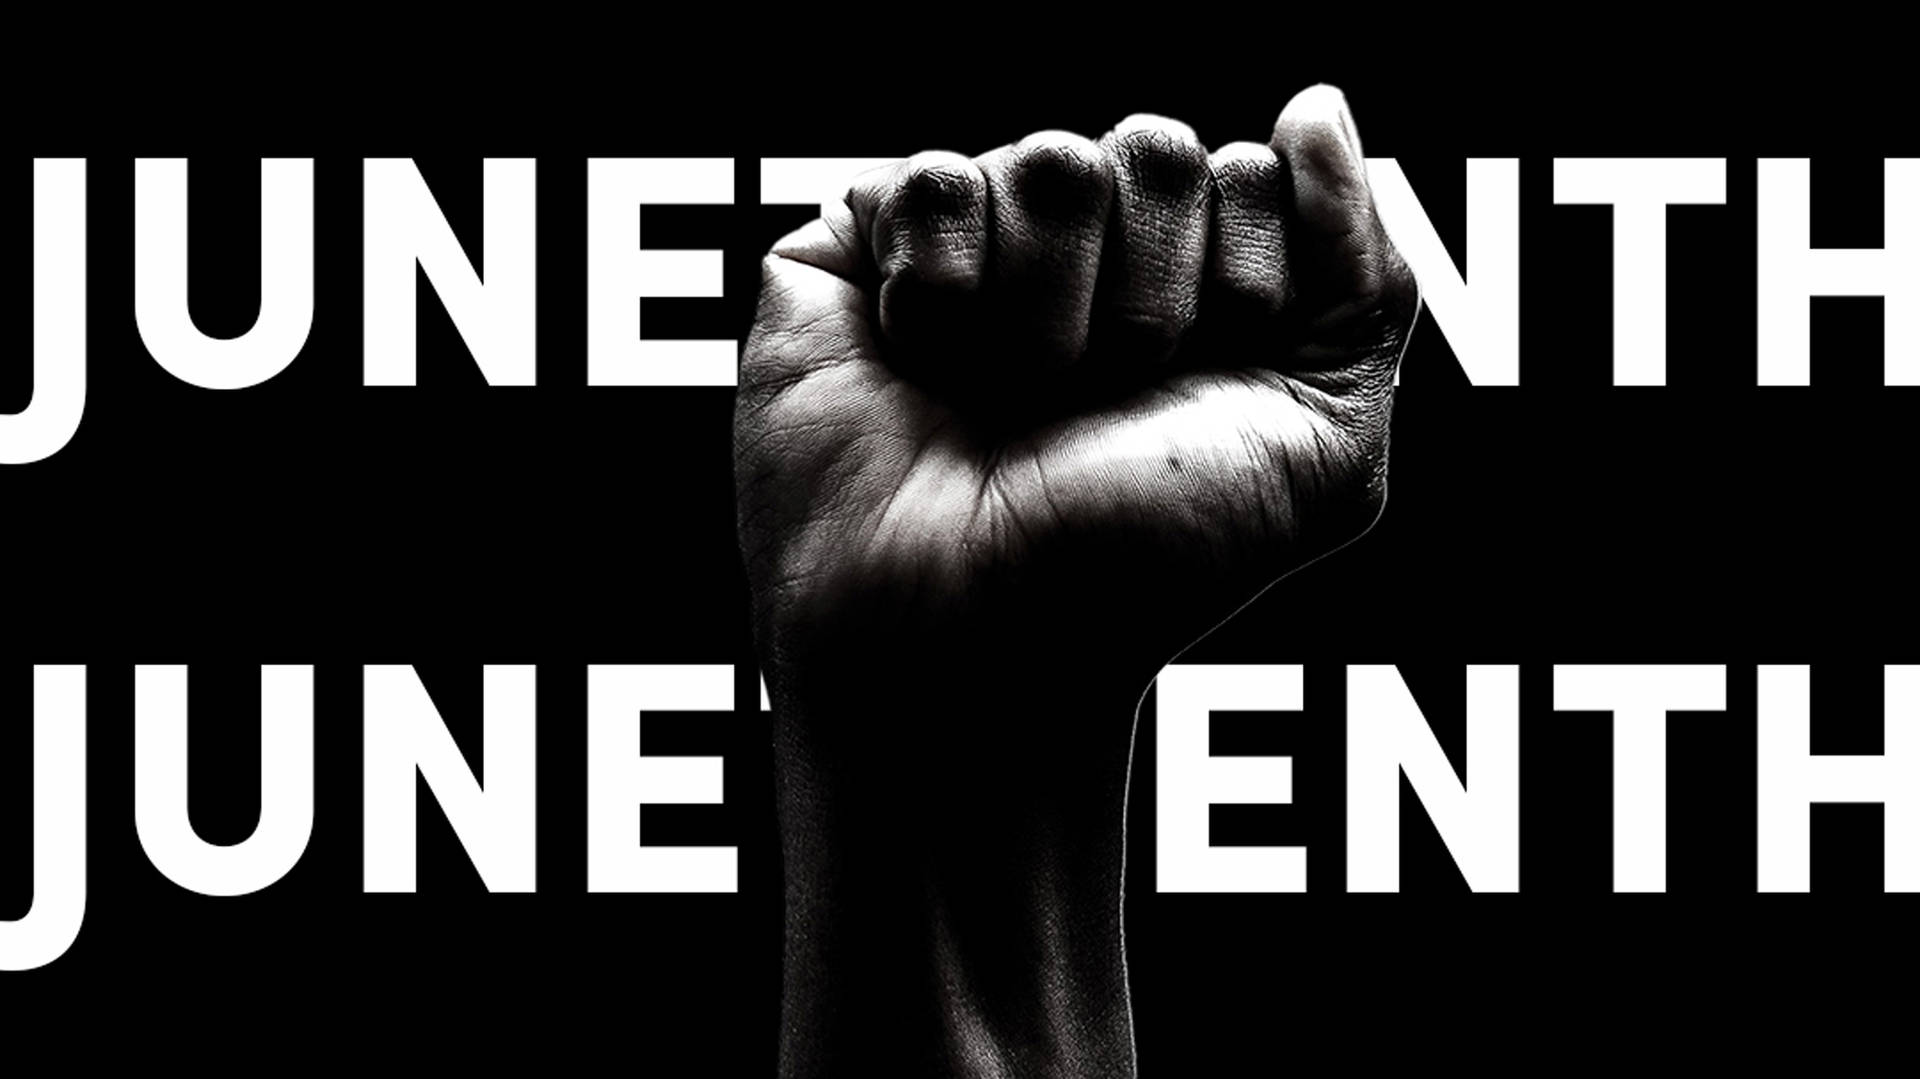 Juneteenth Closed Fist Background